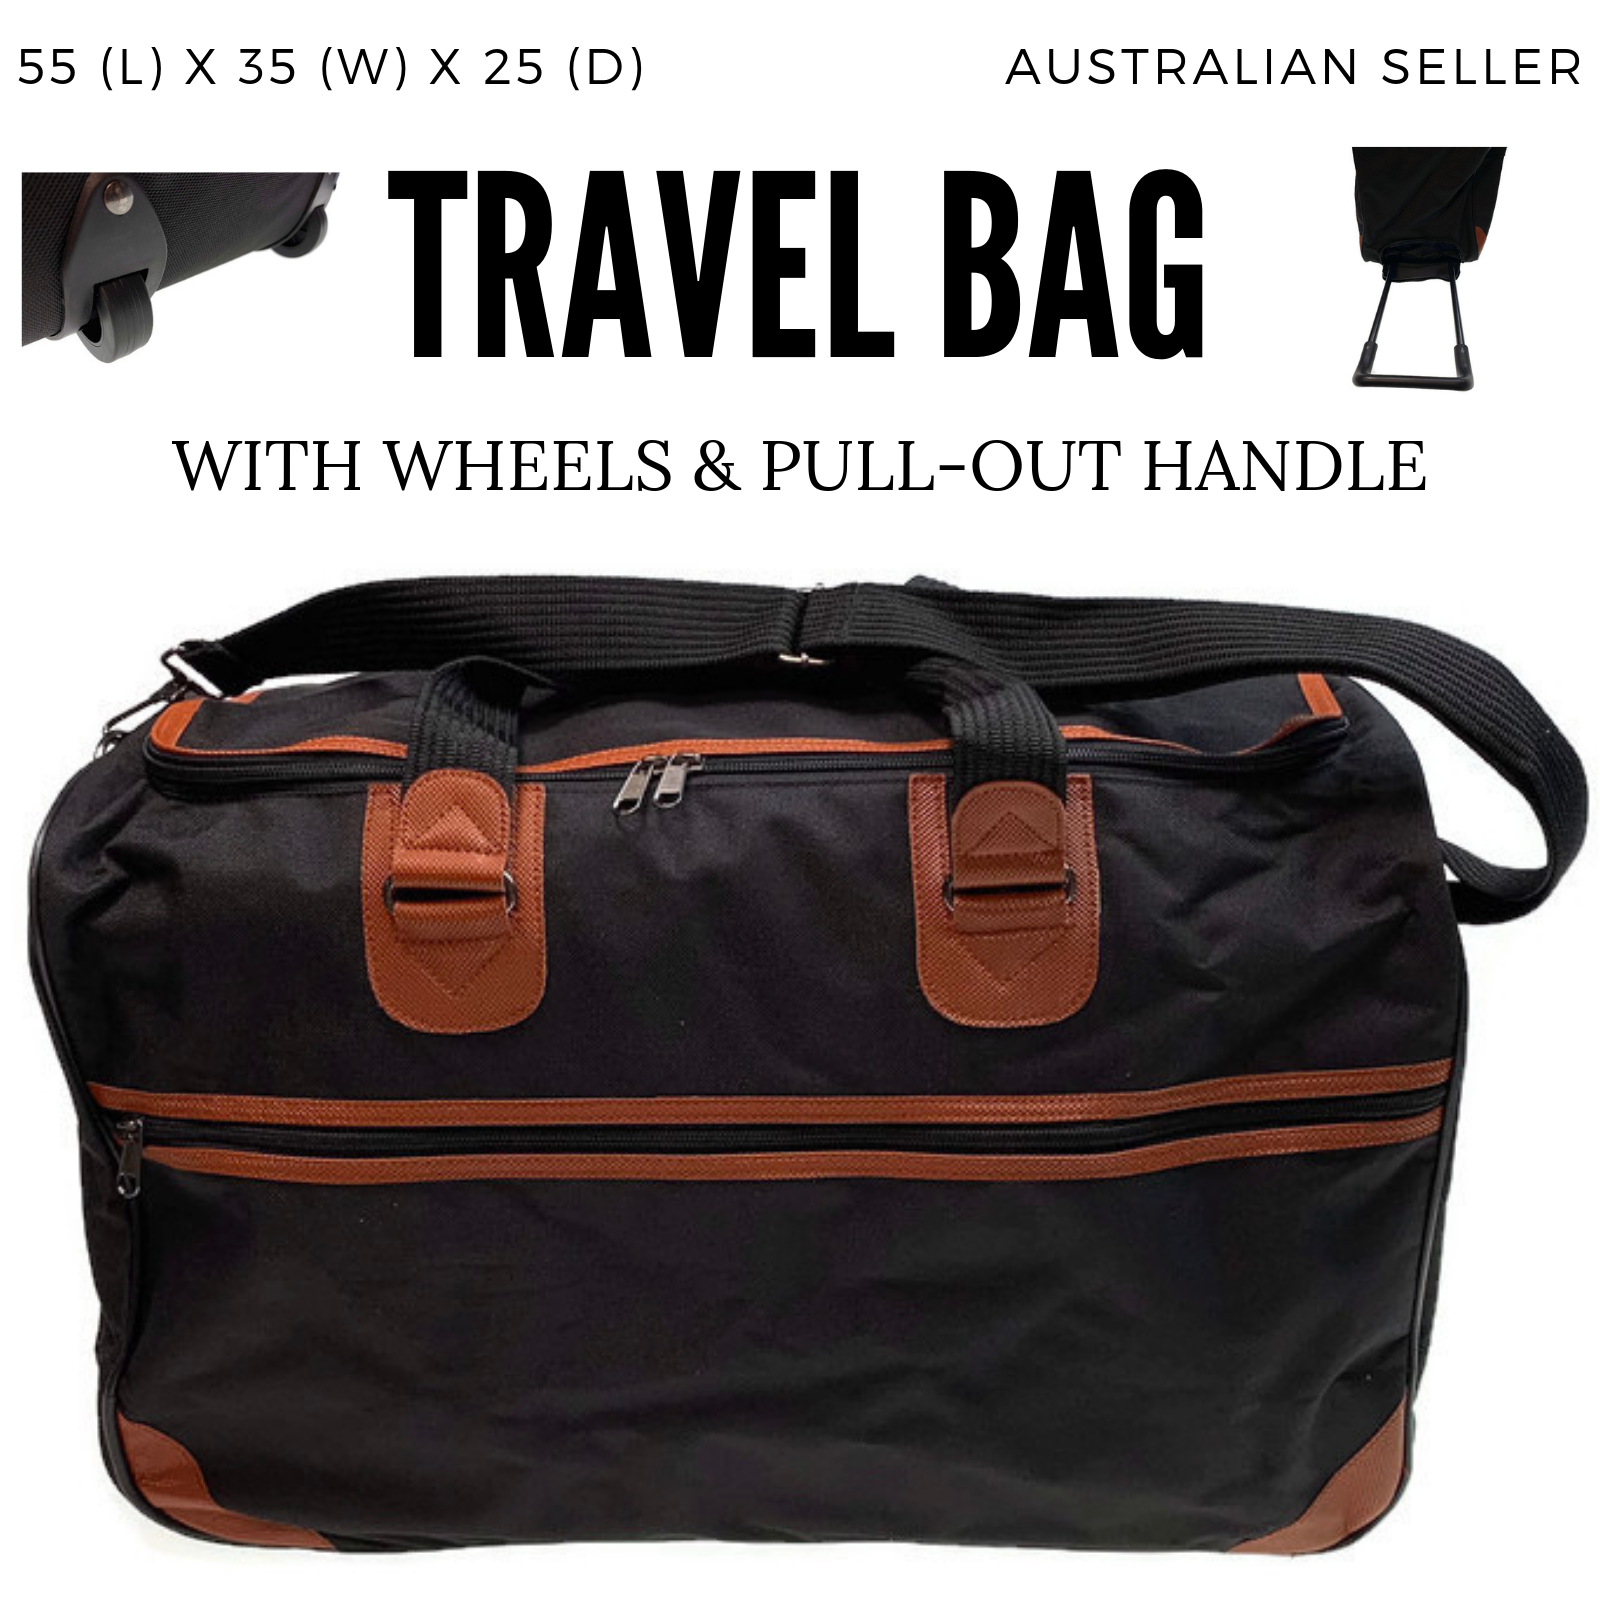 Large Duffle Bag with Wheels & Handle Travel Suitcase Sports Tote Gym Camping